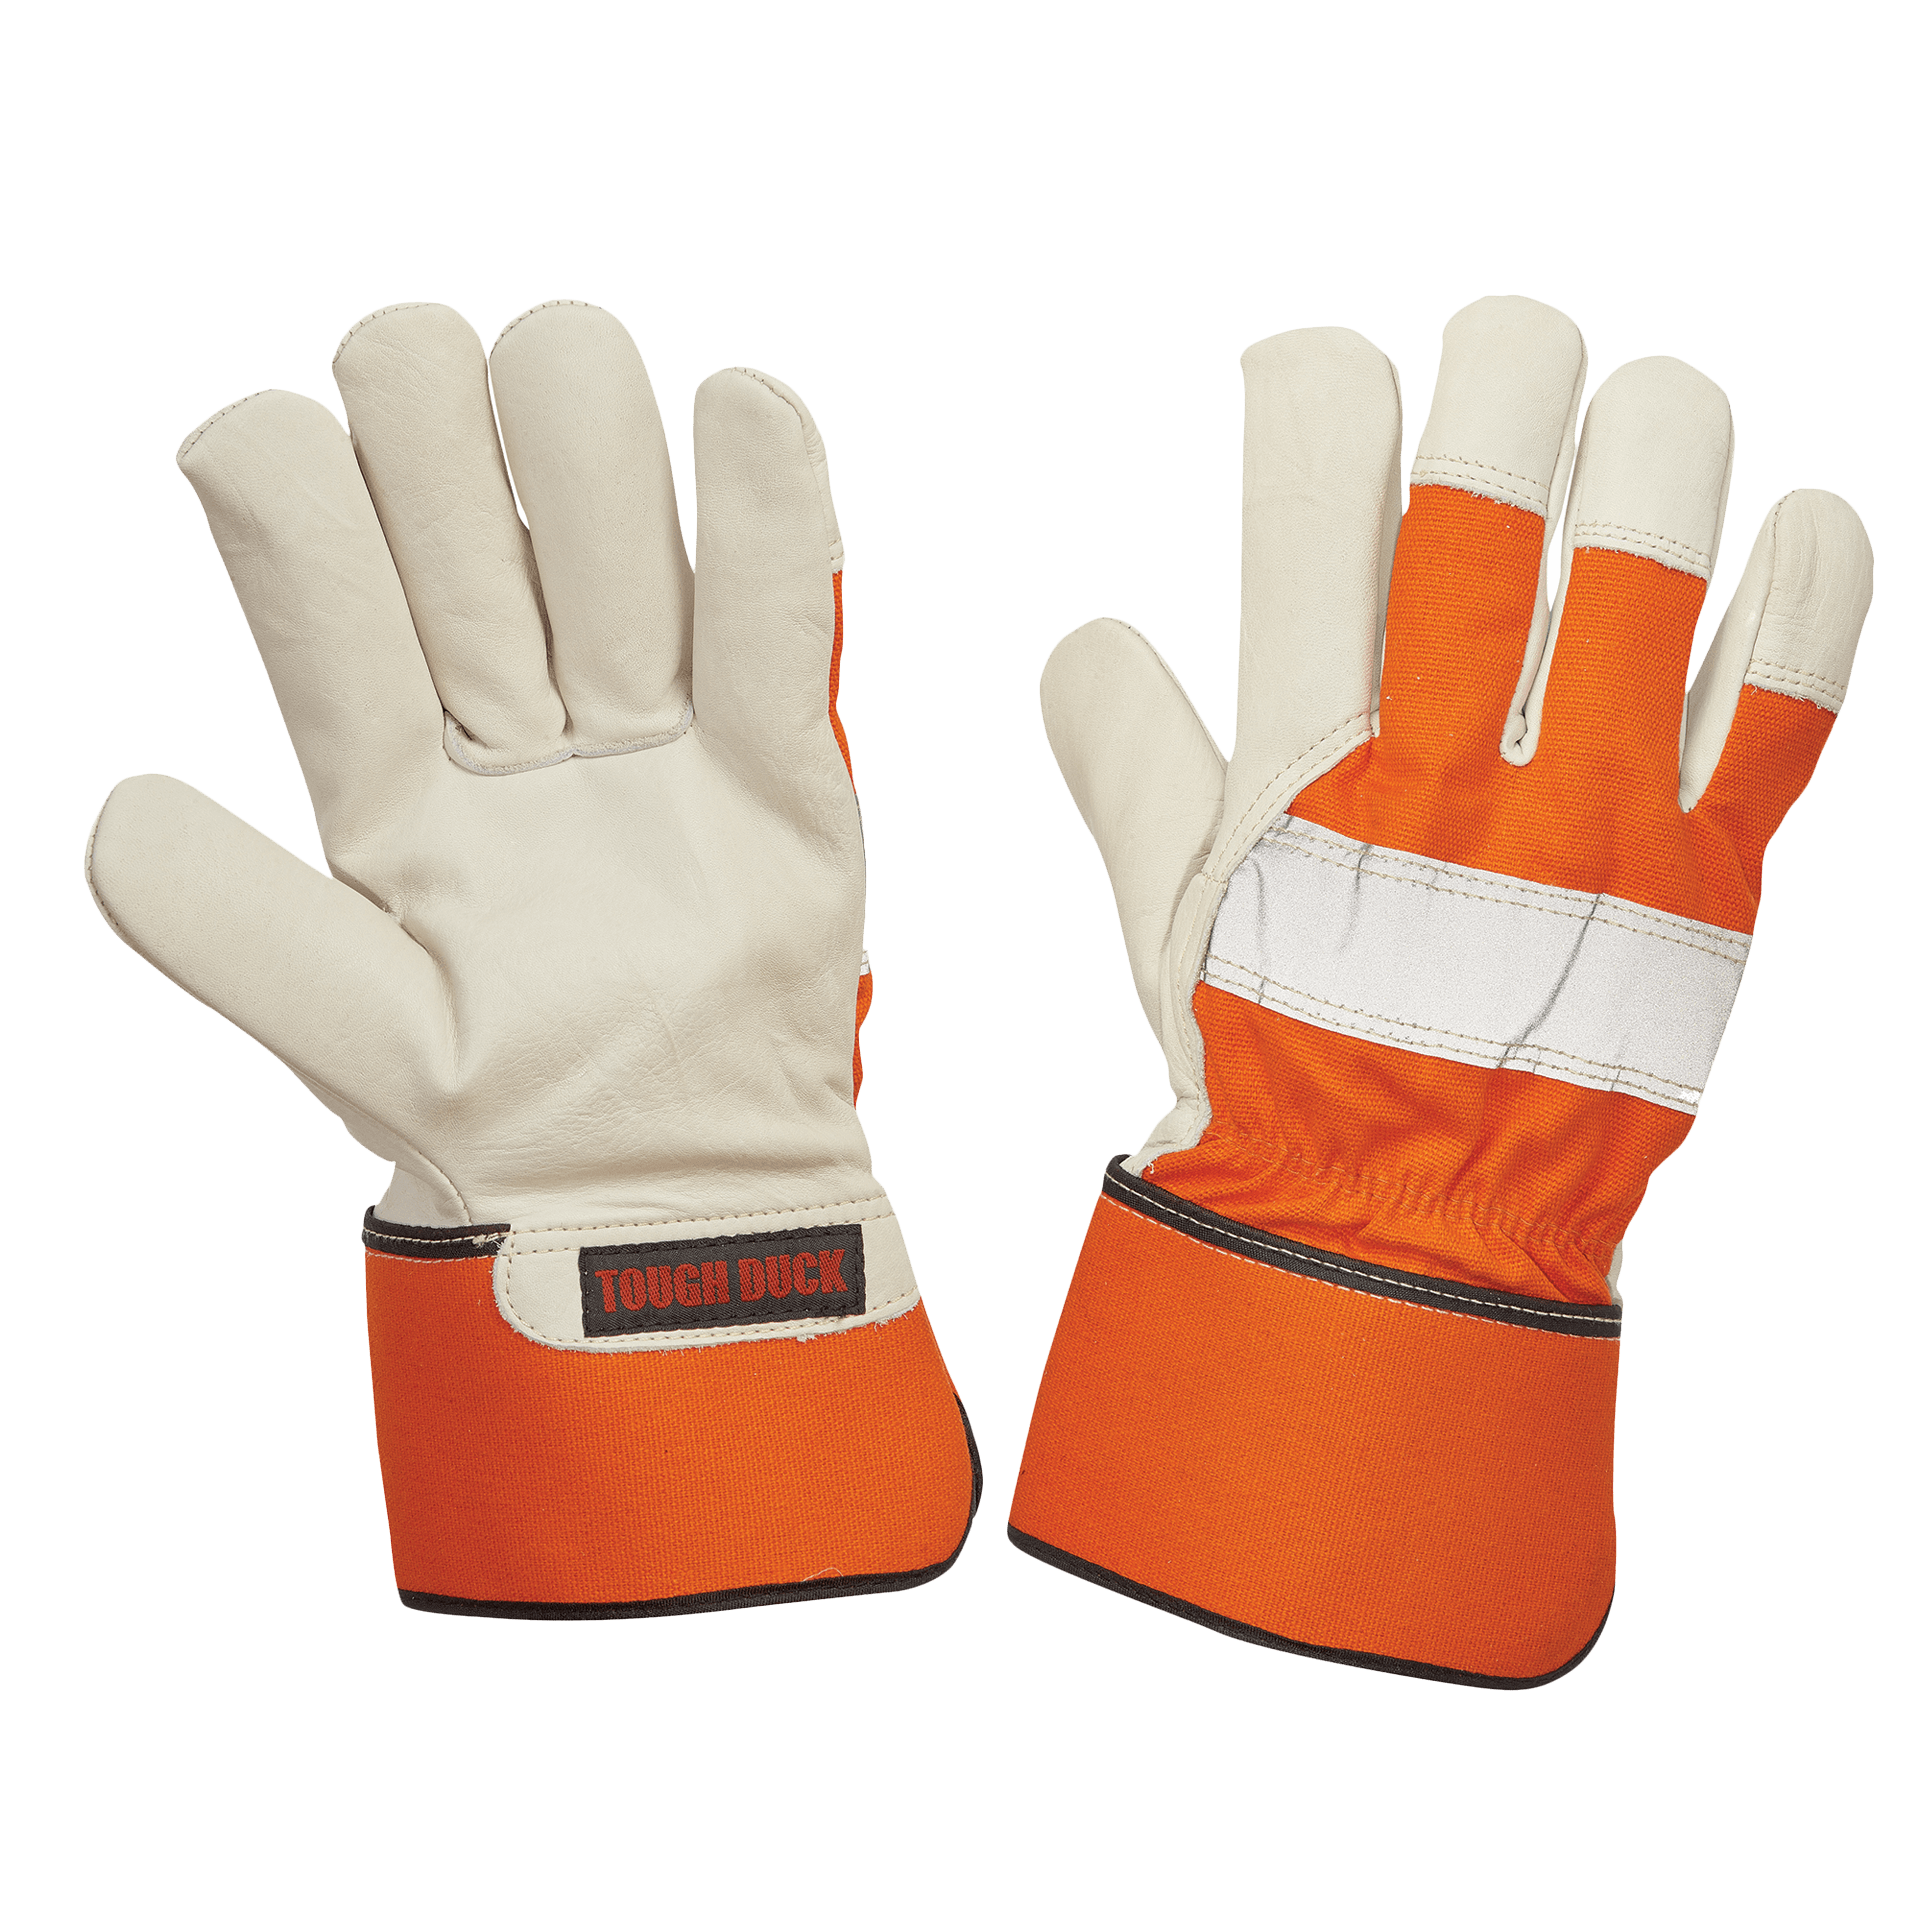 Tough Duck Hi-Vis 100G Thinsulate Premium Cowgrain Leather Winter Work Gloves Work Gloves and Hats - Cleanflow